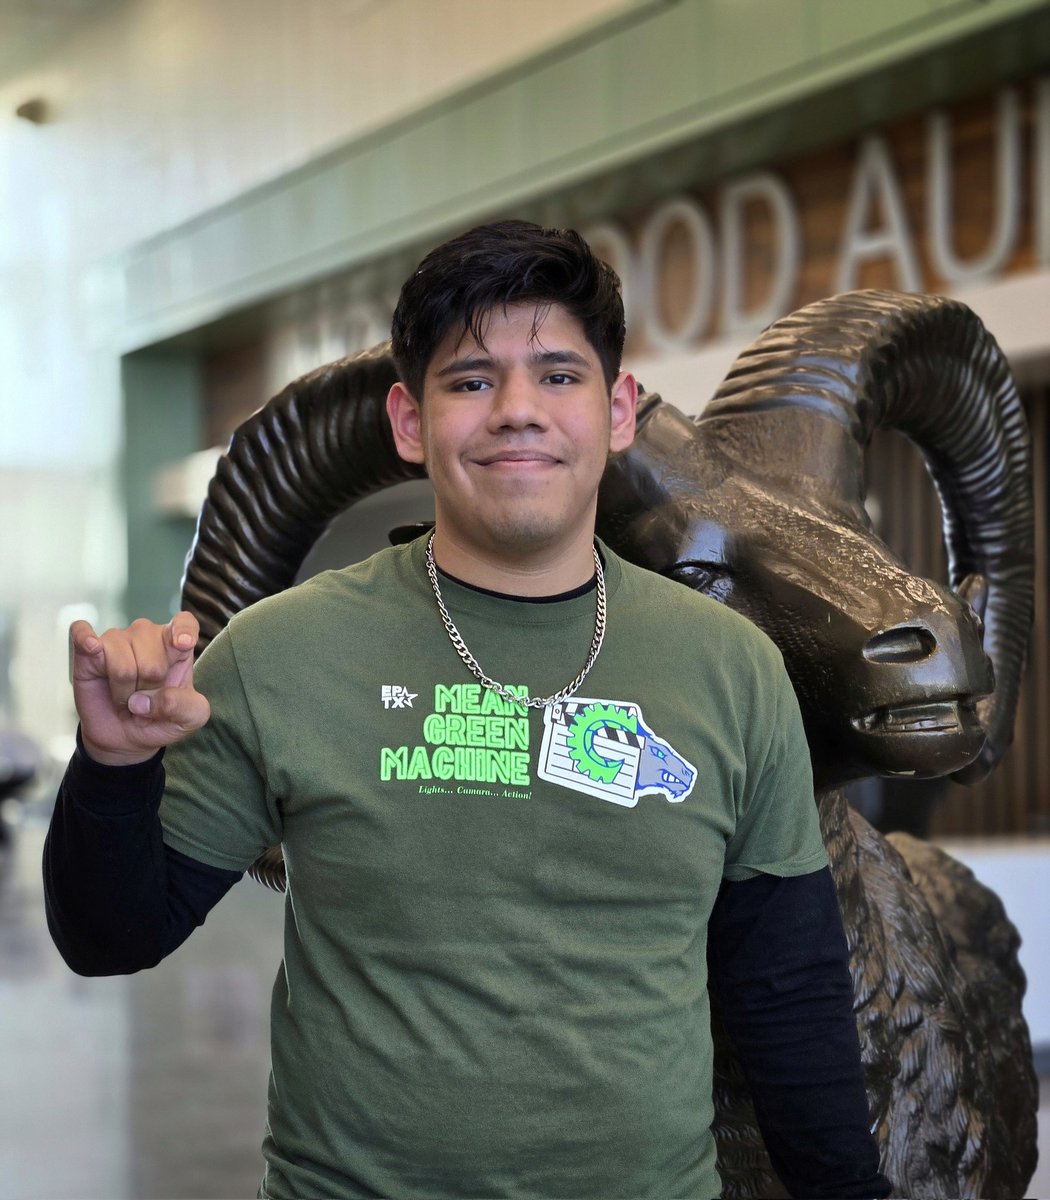 Congratulations to Carlo, build head of 5911, on receiving The Gates Scholarship and earning a full ride to the college of his choice! 🎉 #TeamSISD #TheGatesScholarship